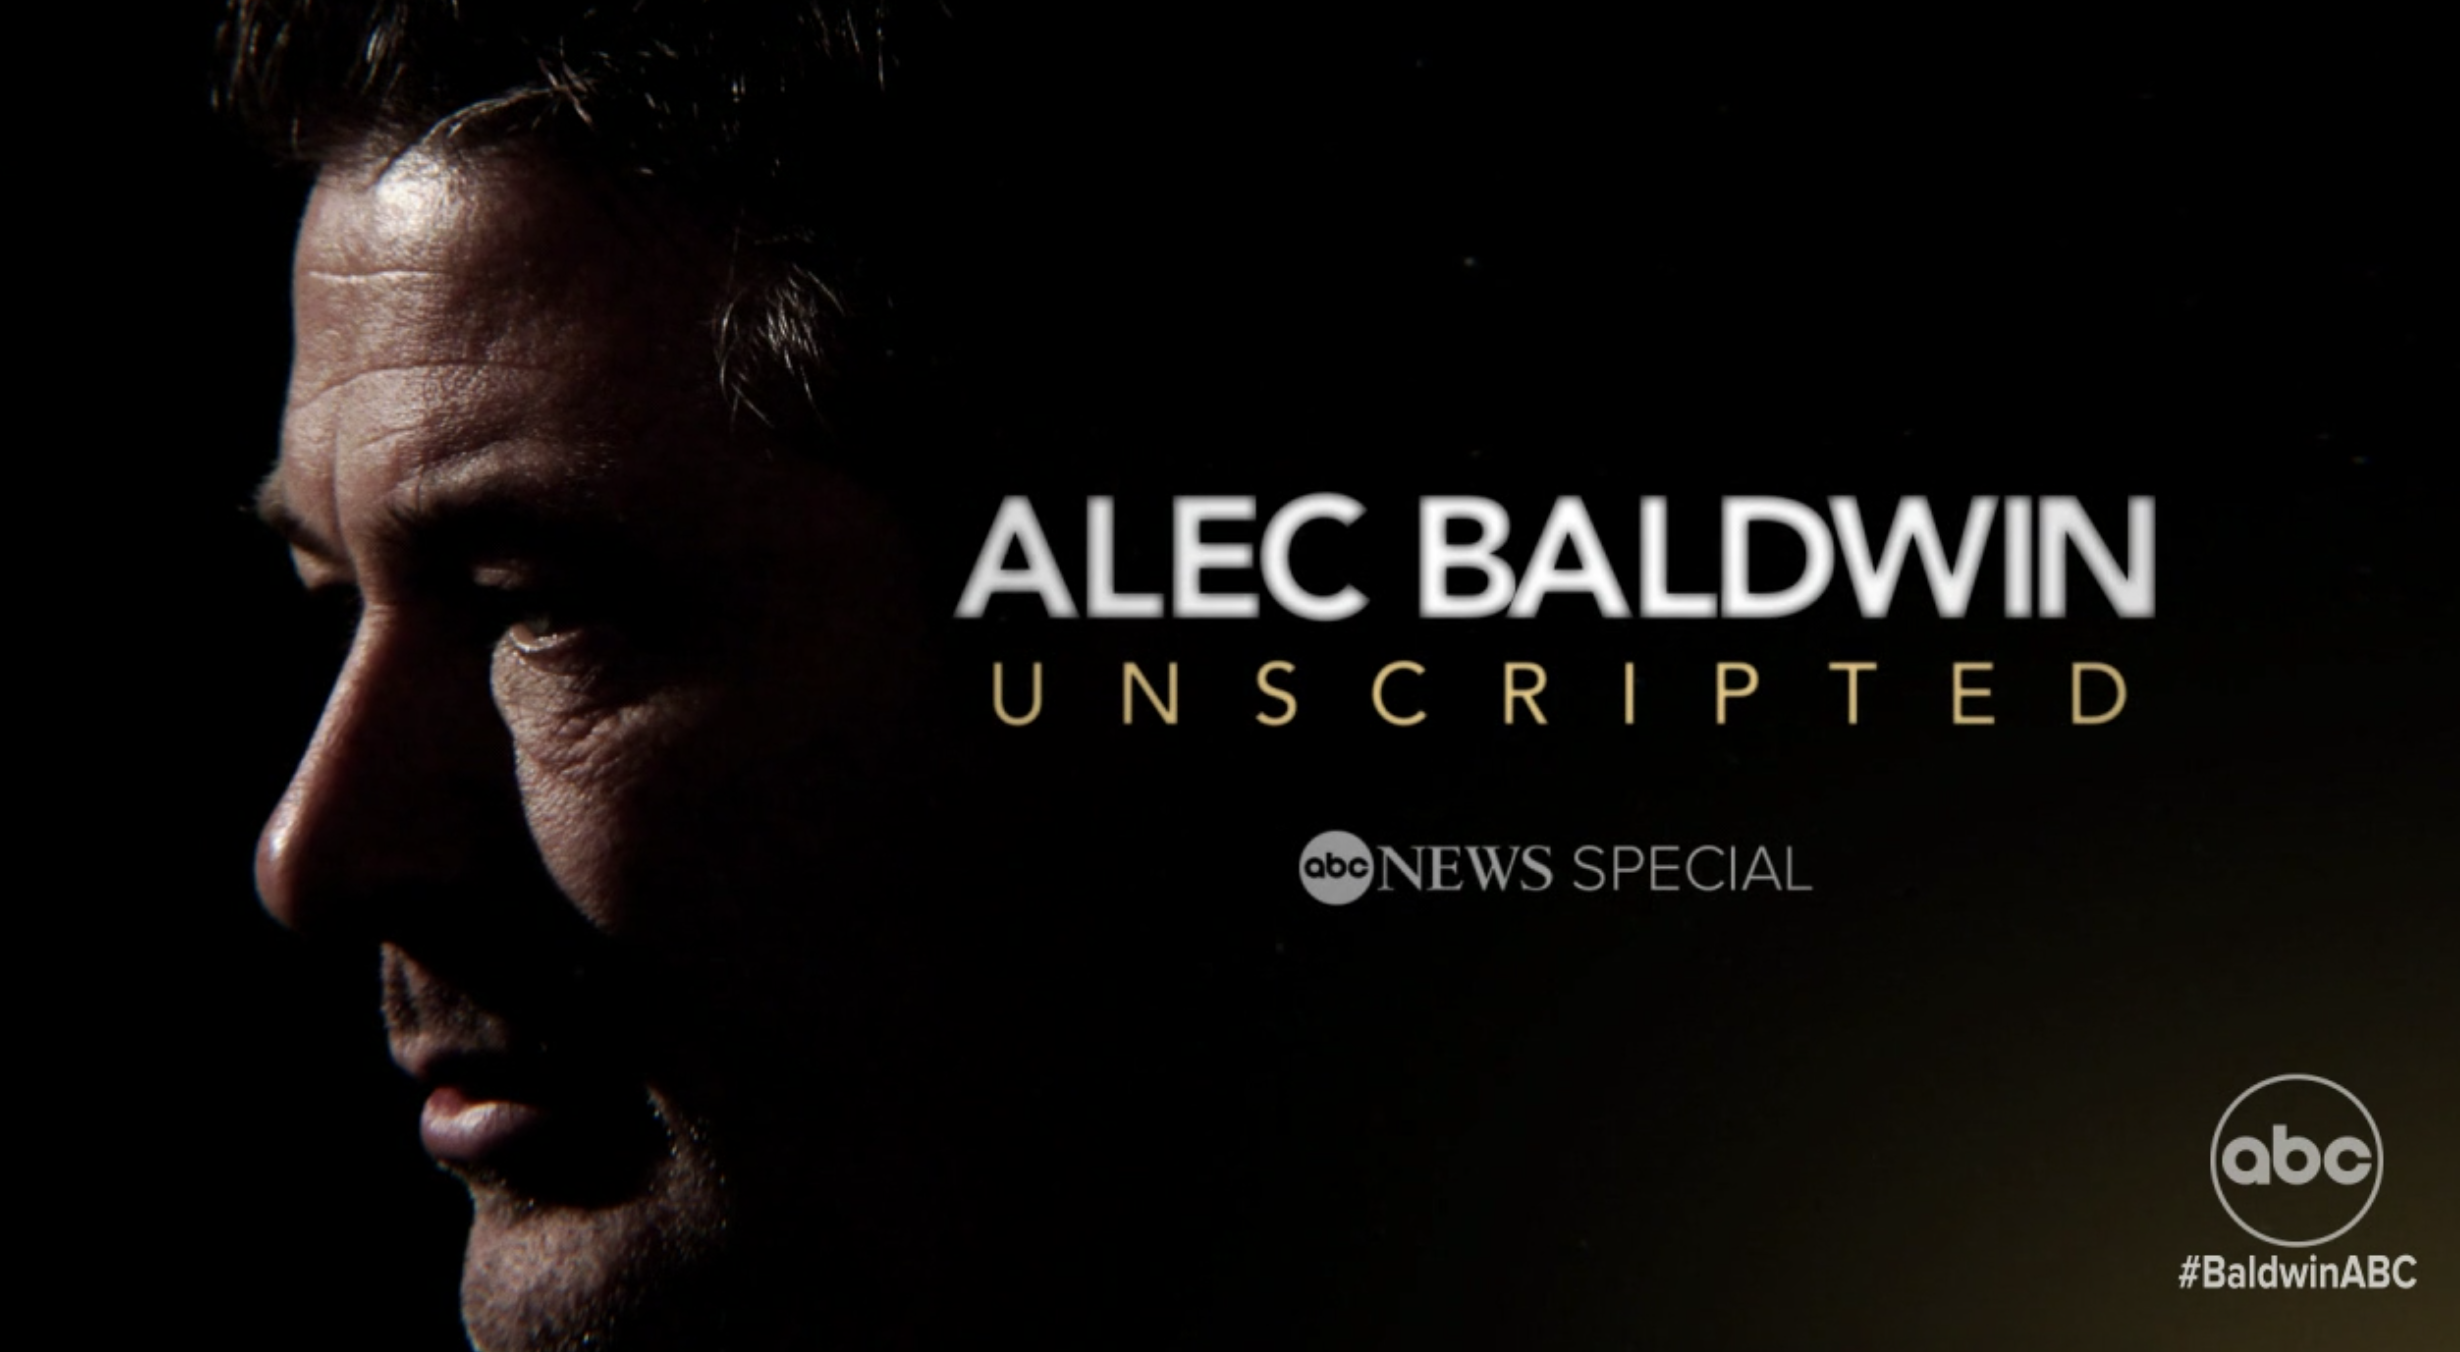 The poster for the Alec Baldwin interview